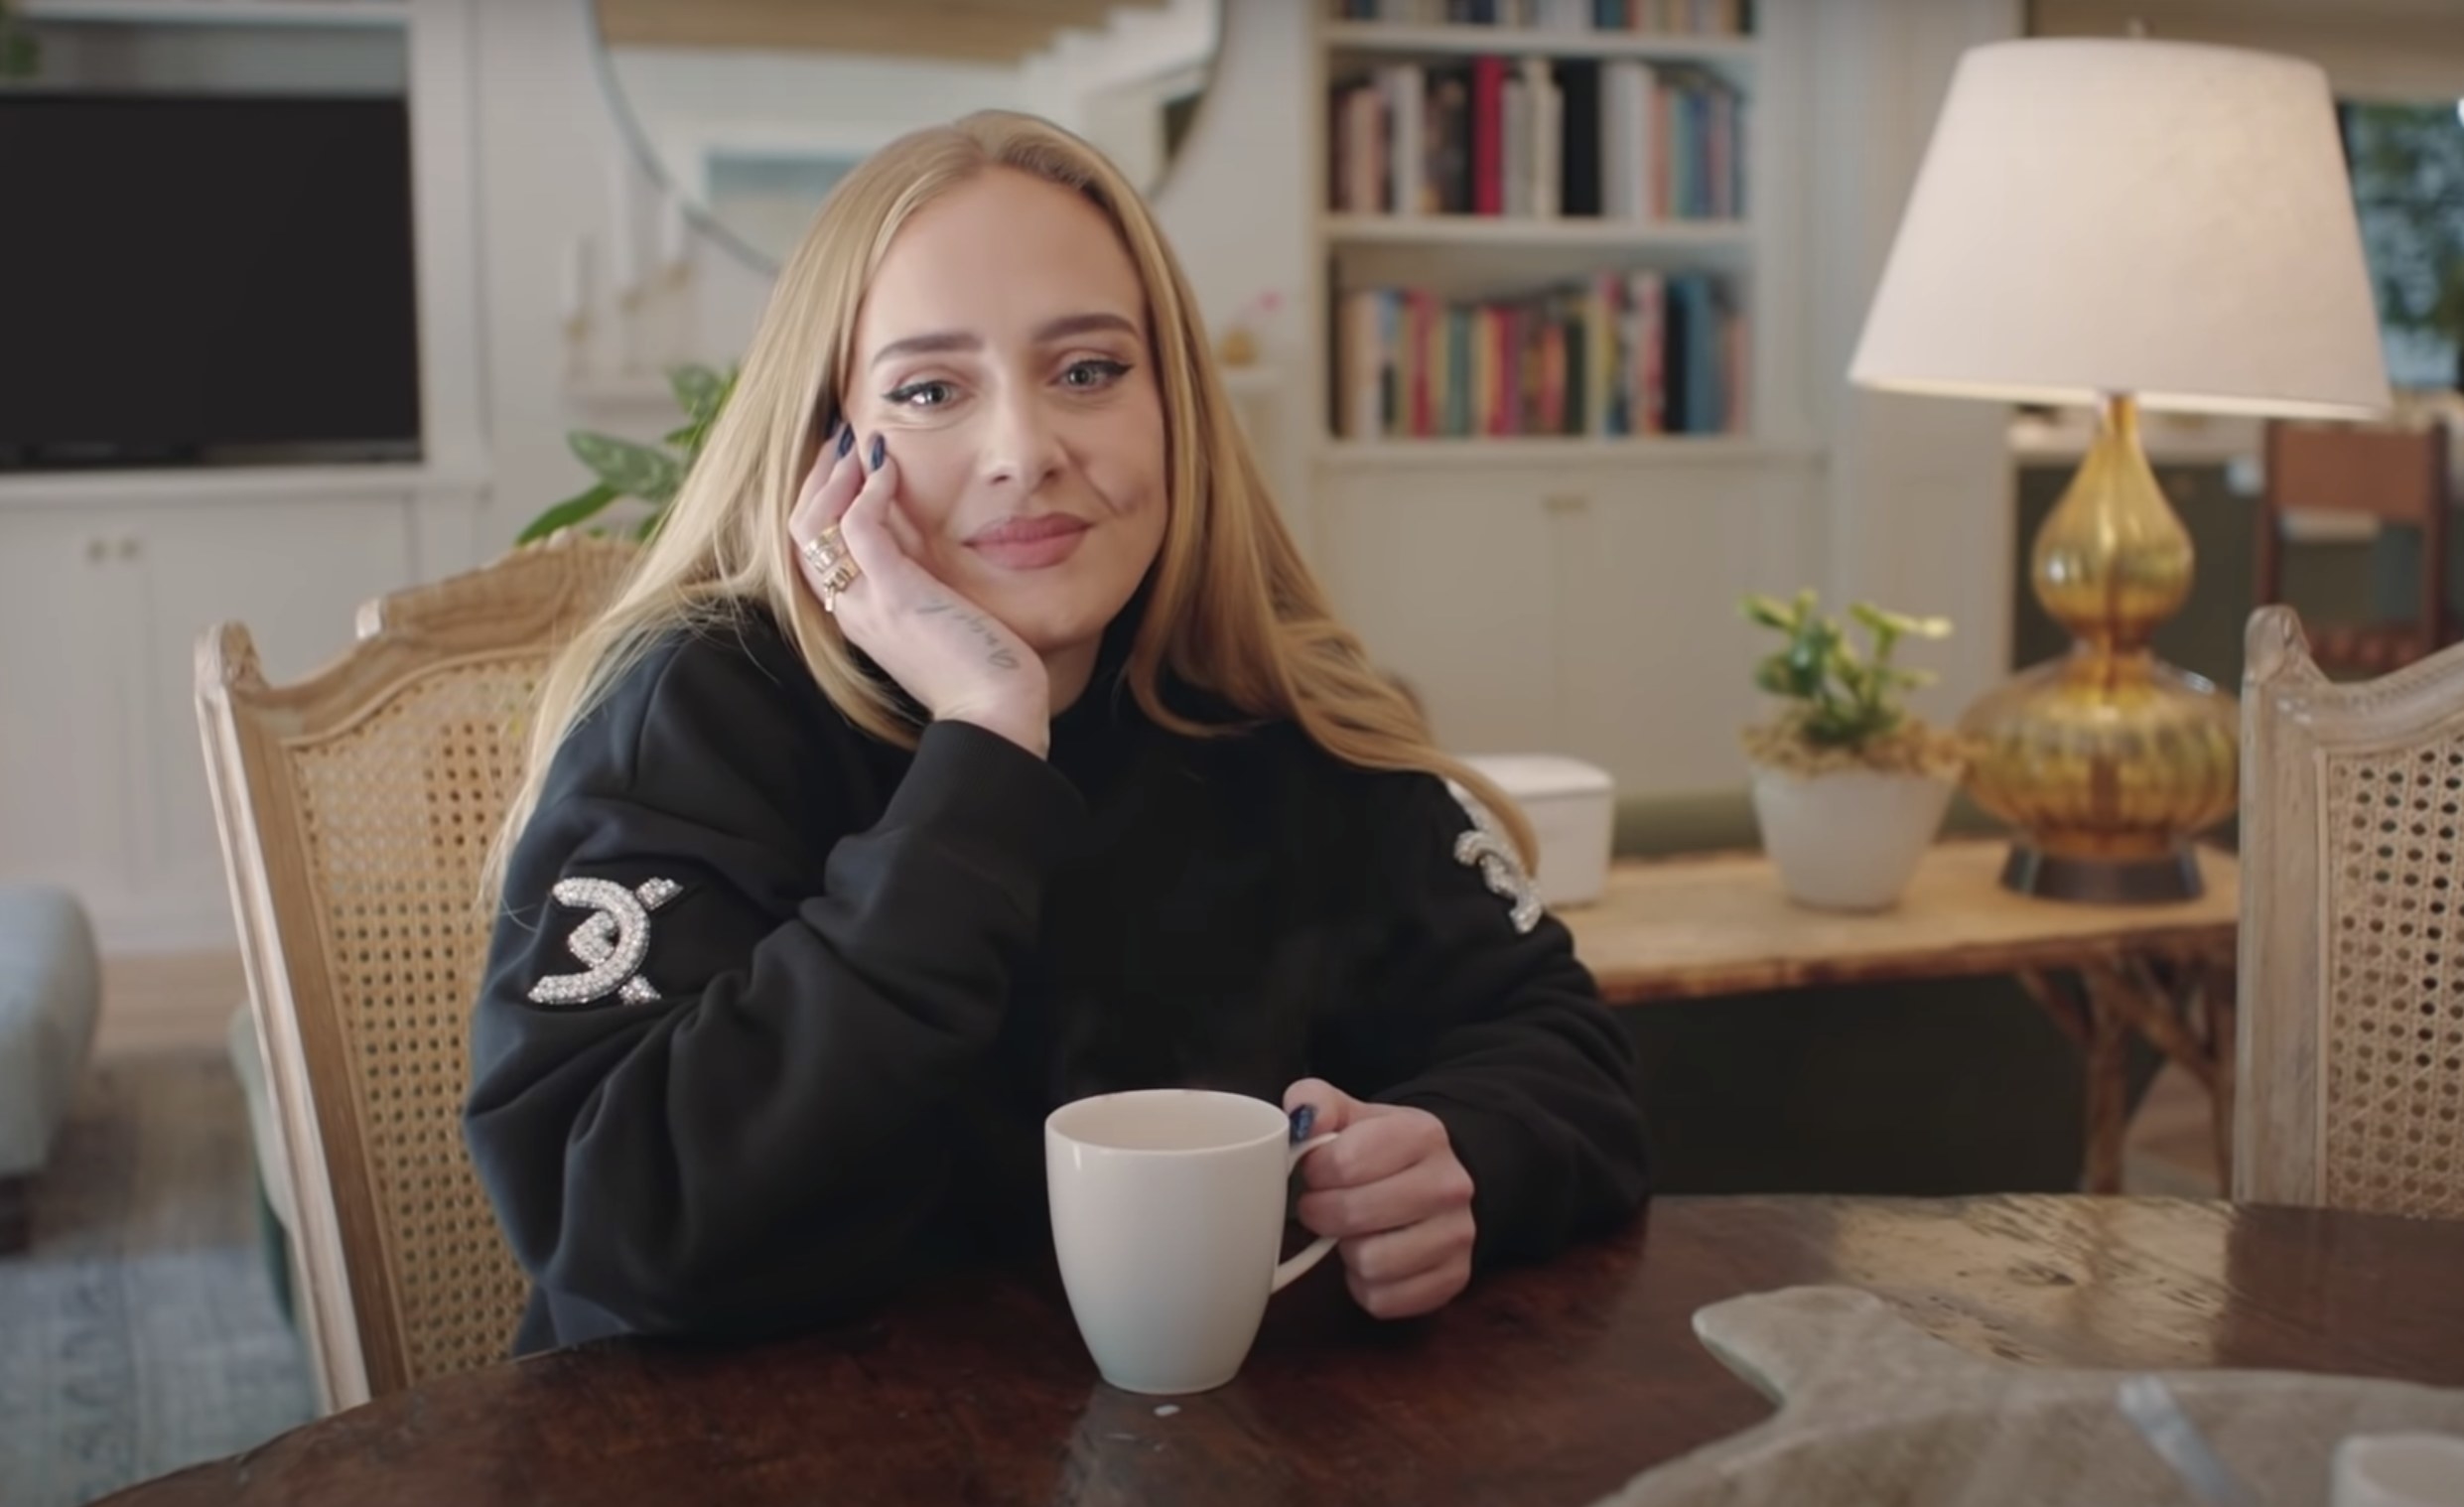 Adele sits at her dining table with a cup of tear during the interview